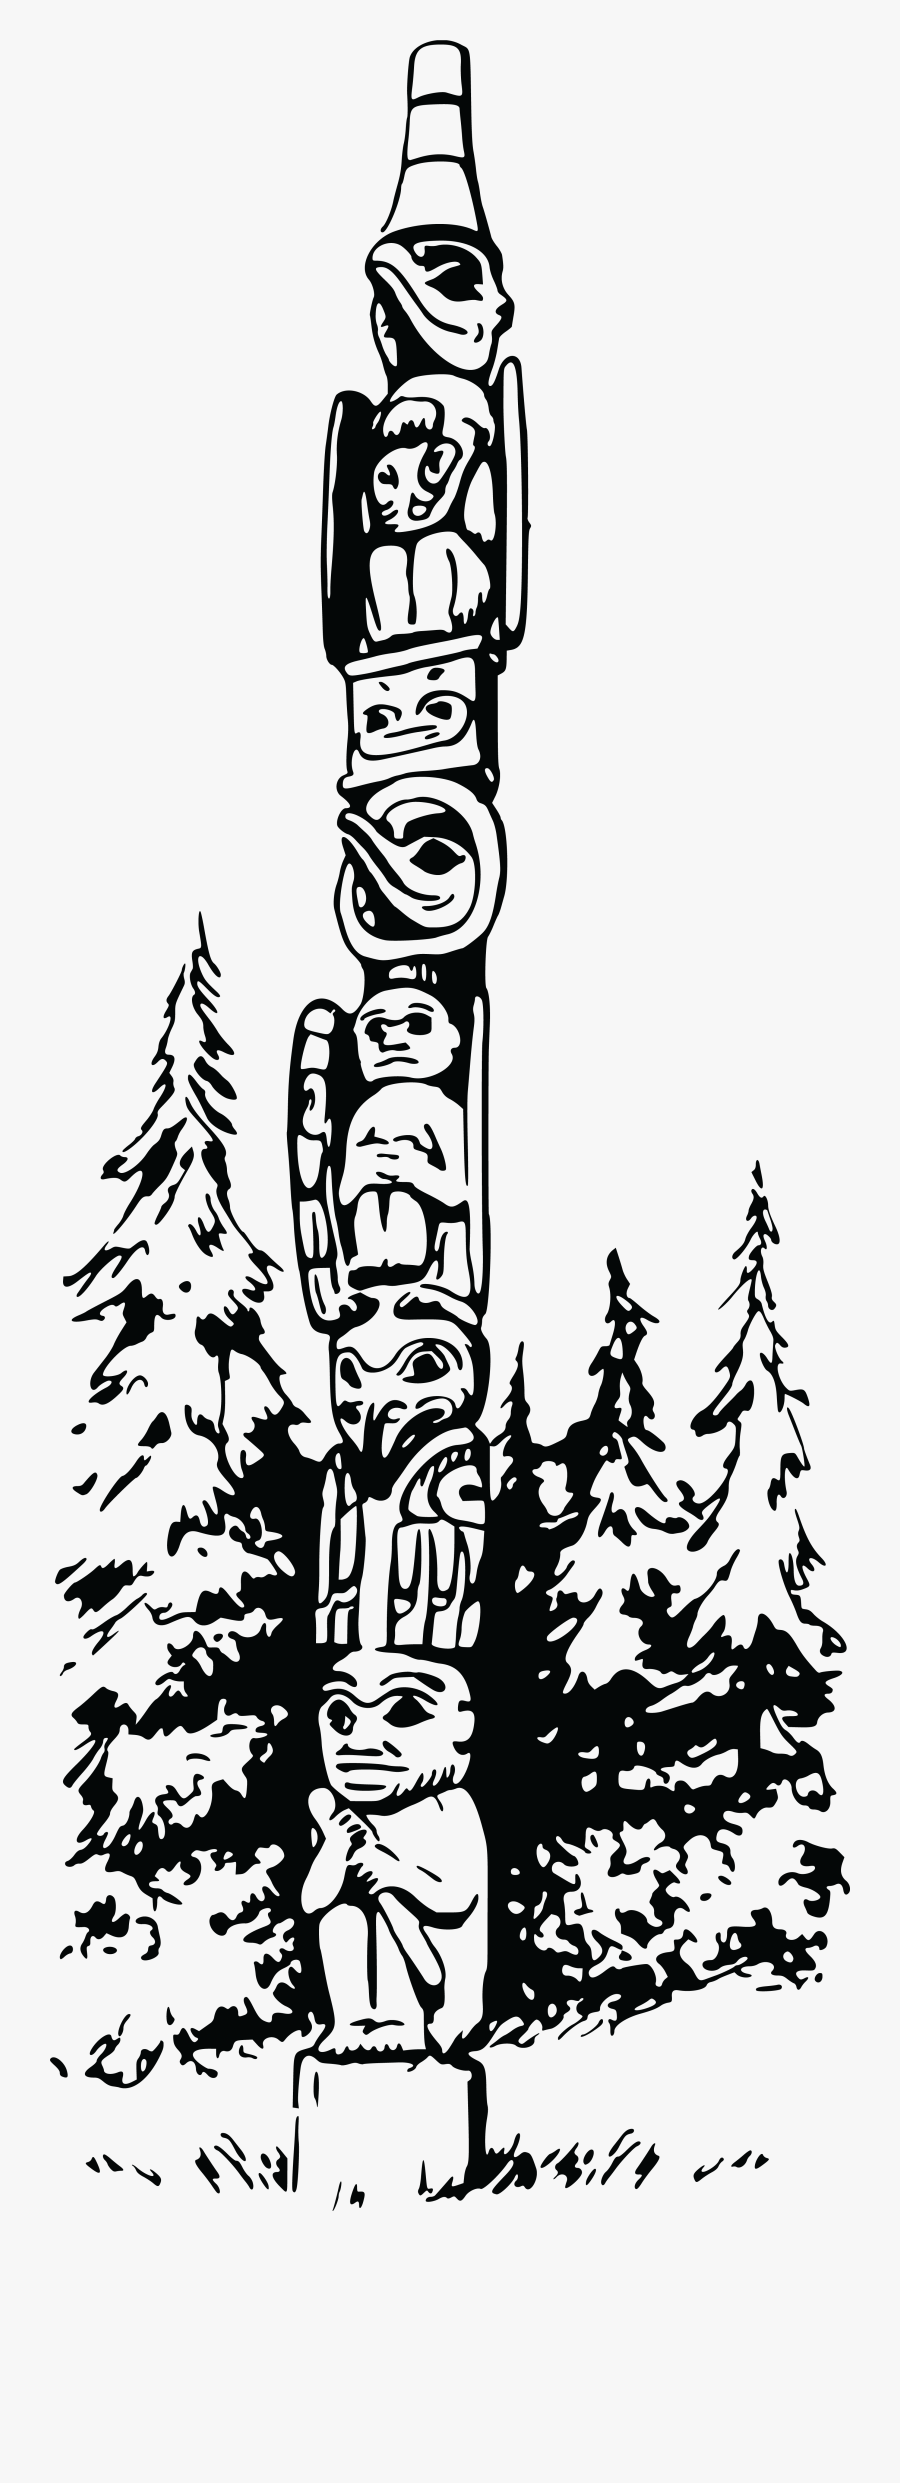 Free Clipart Of A Totem Pole - Totem Pole Tree Drawing, Transparent Clipart